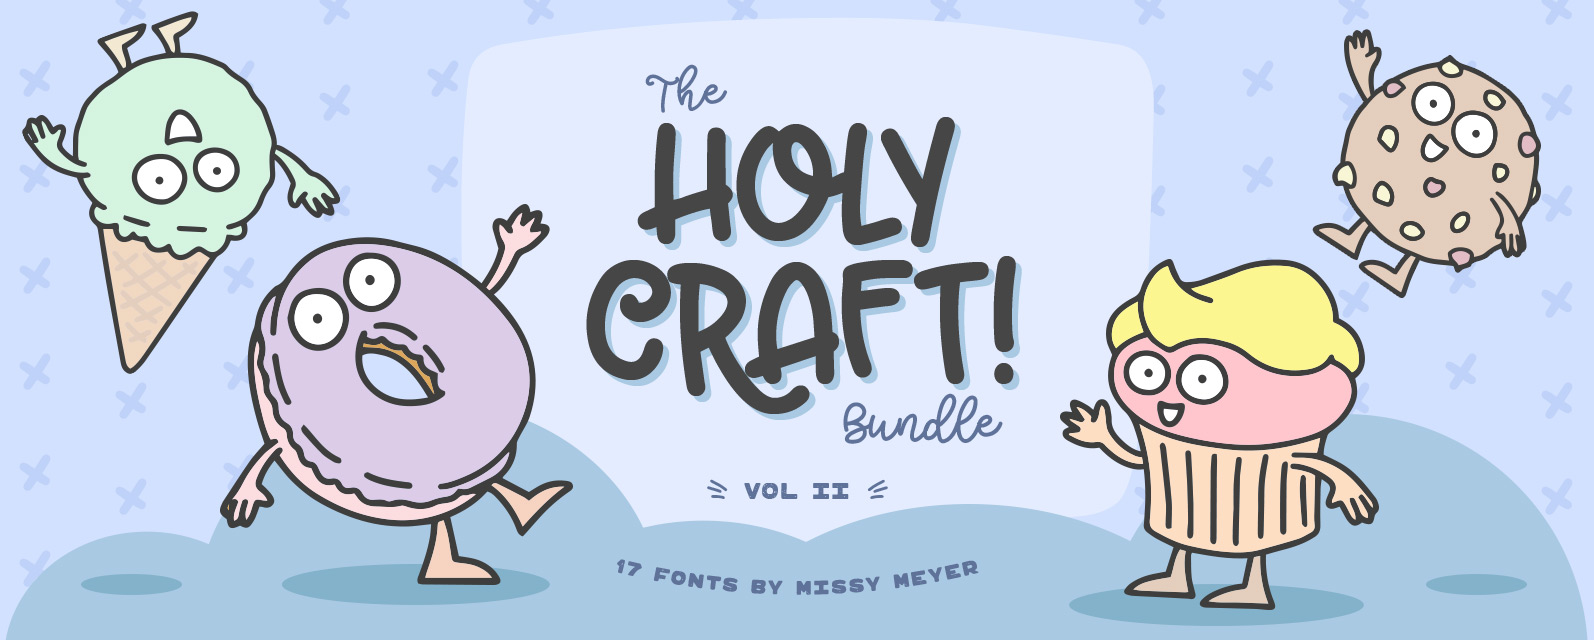 The Holy Craft Bundle Vol II Cover